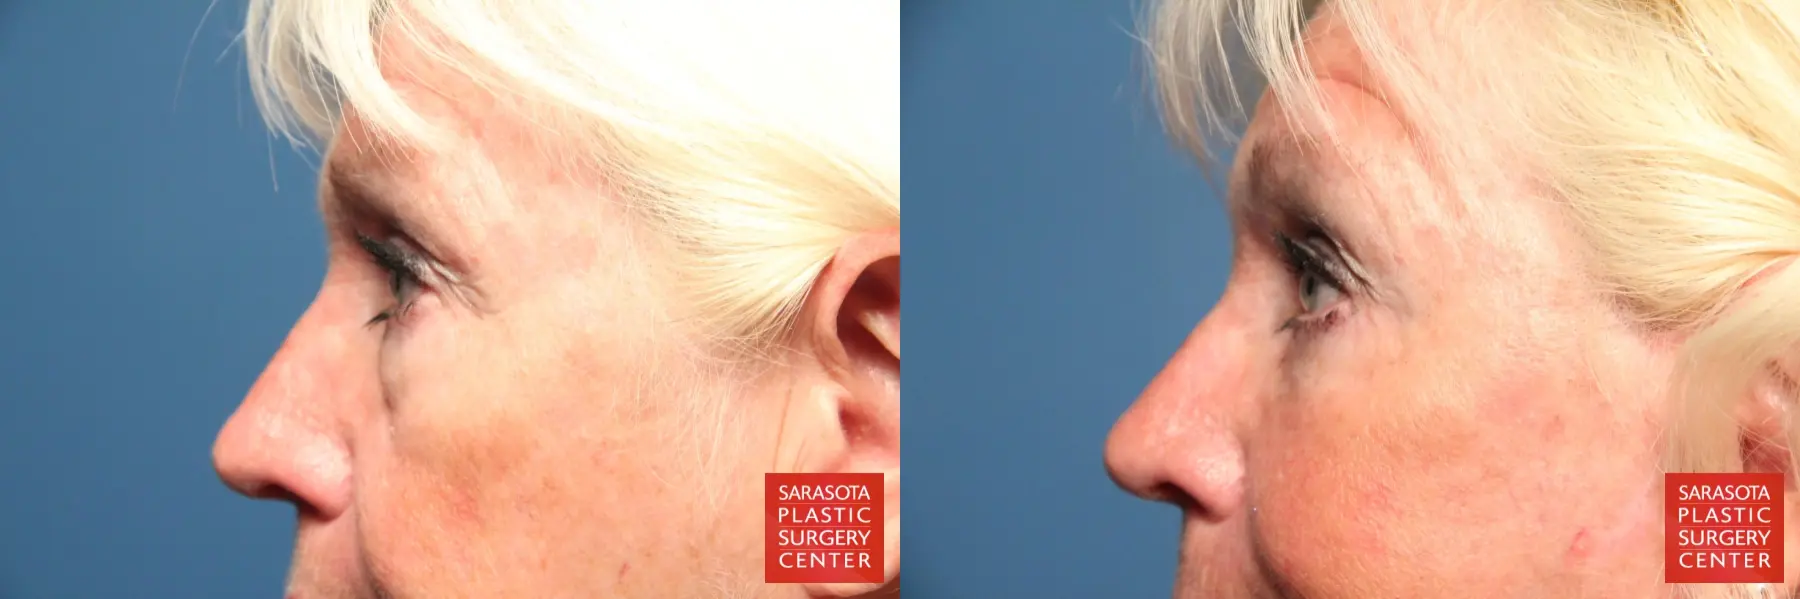 Eyelid Surgery: Patient 1 - Before and After 5